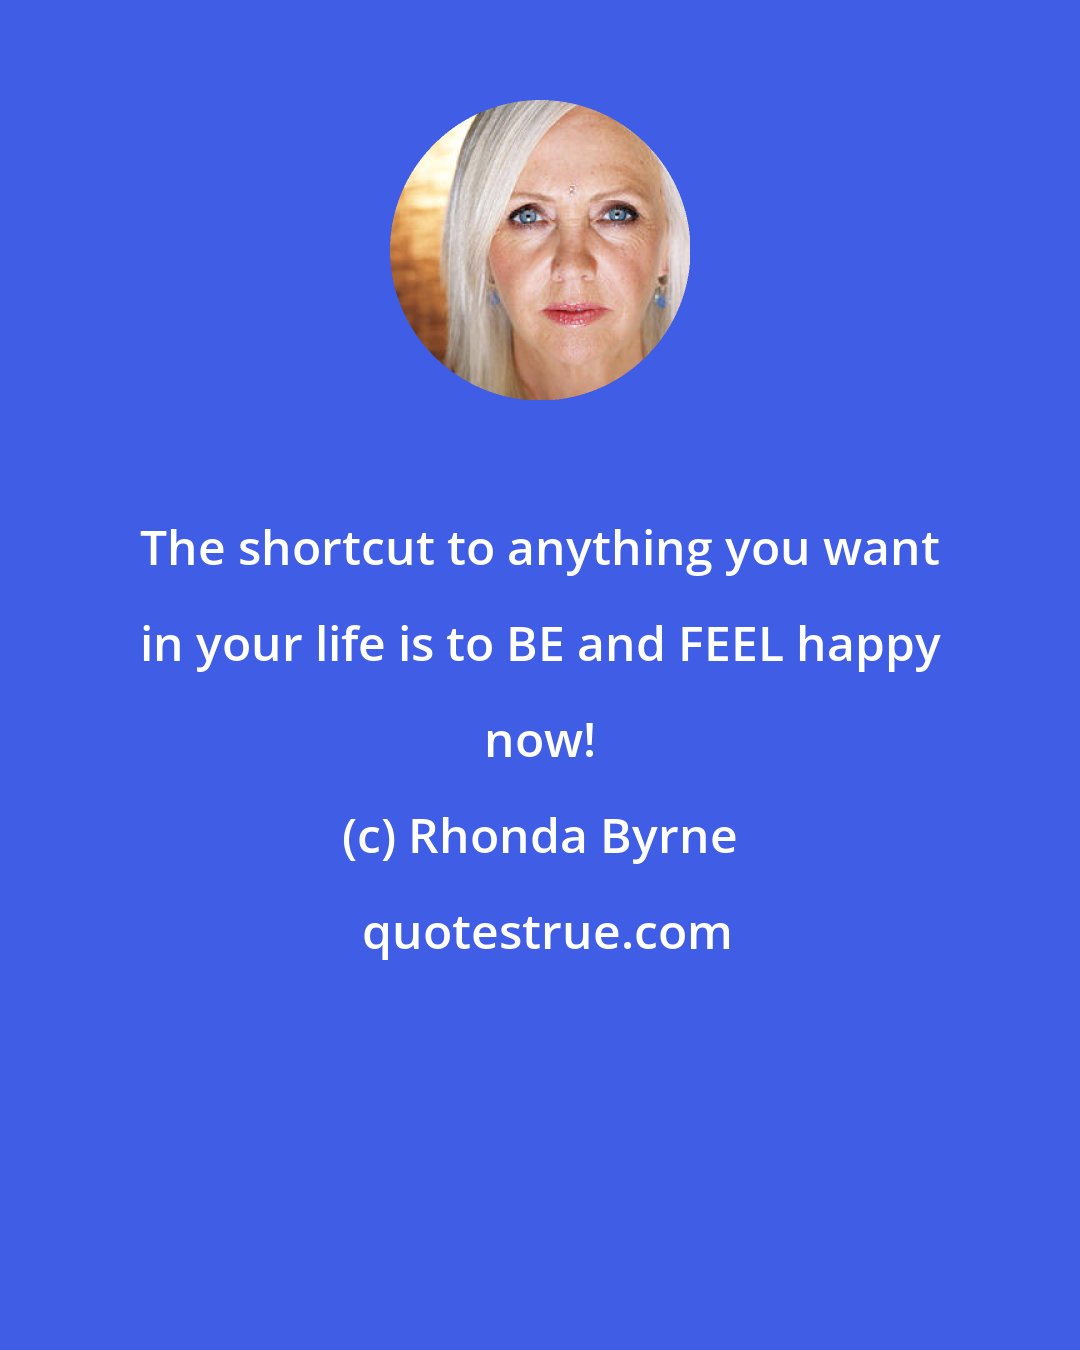 Rhonda Byrne: The shortcut to anything you want in your life is to BE and FEEL happy now!